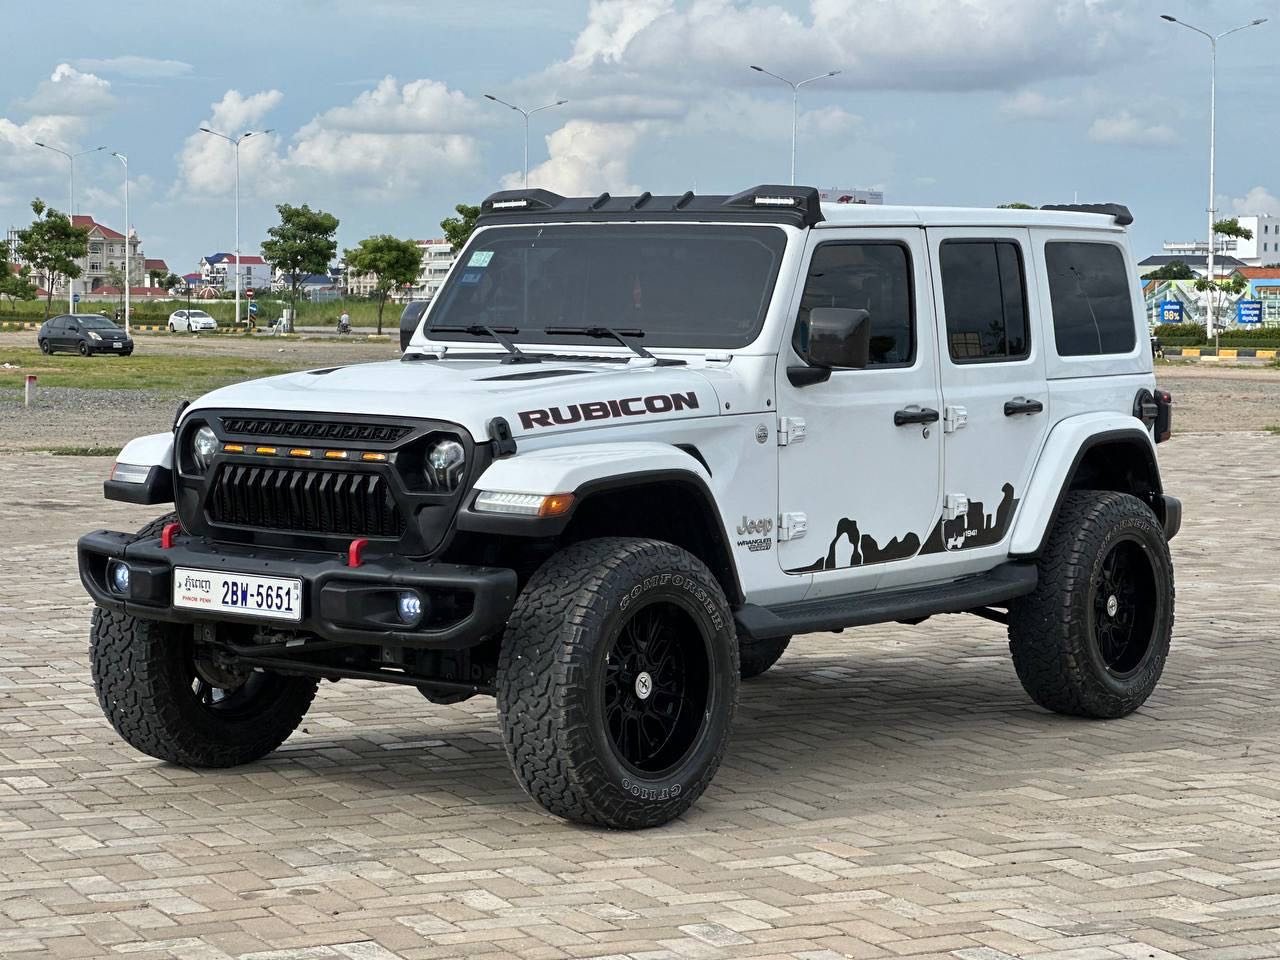 Jeep wrangler 2018 for sale